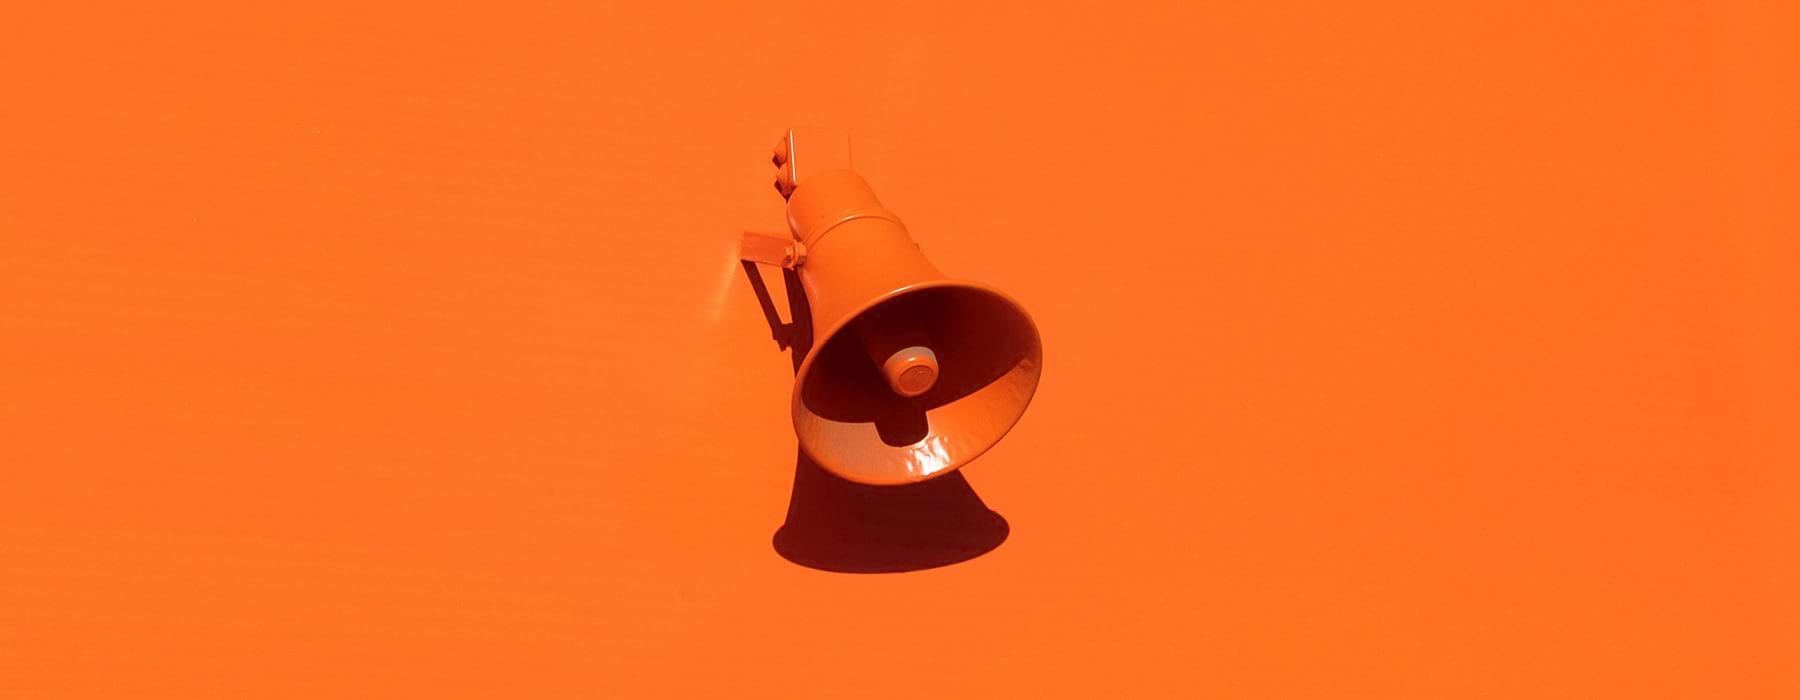 orange wall with an orange speaker attached to it